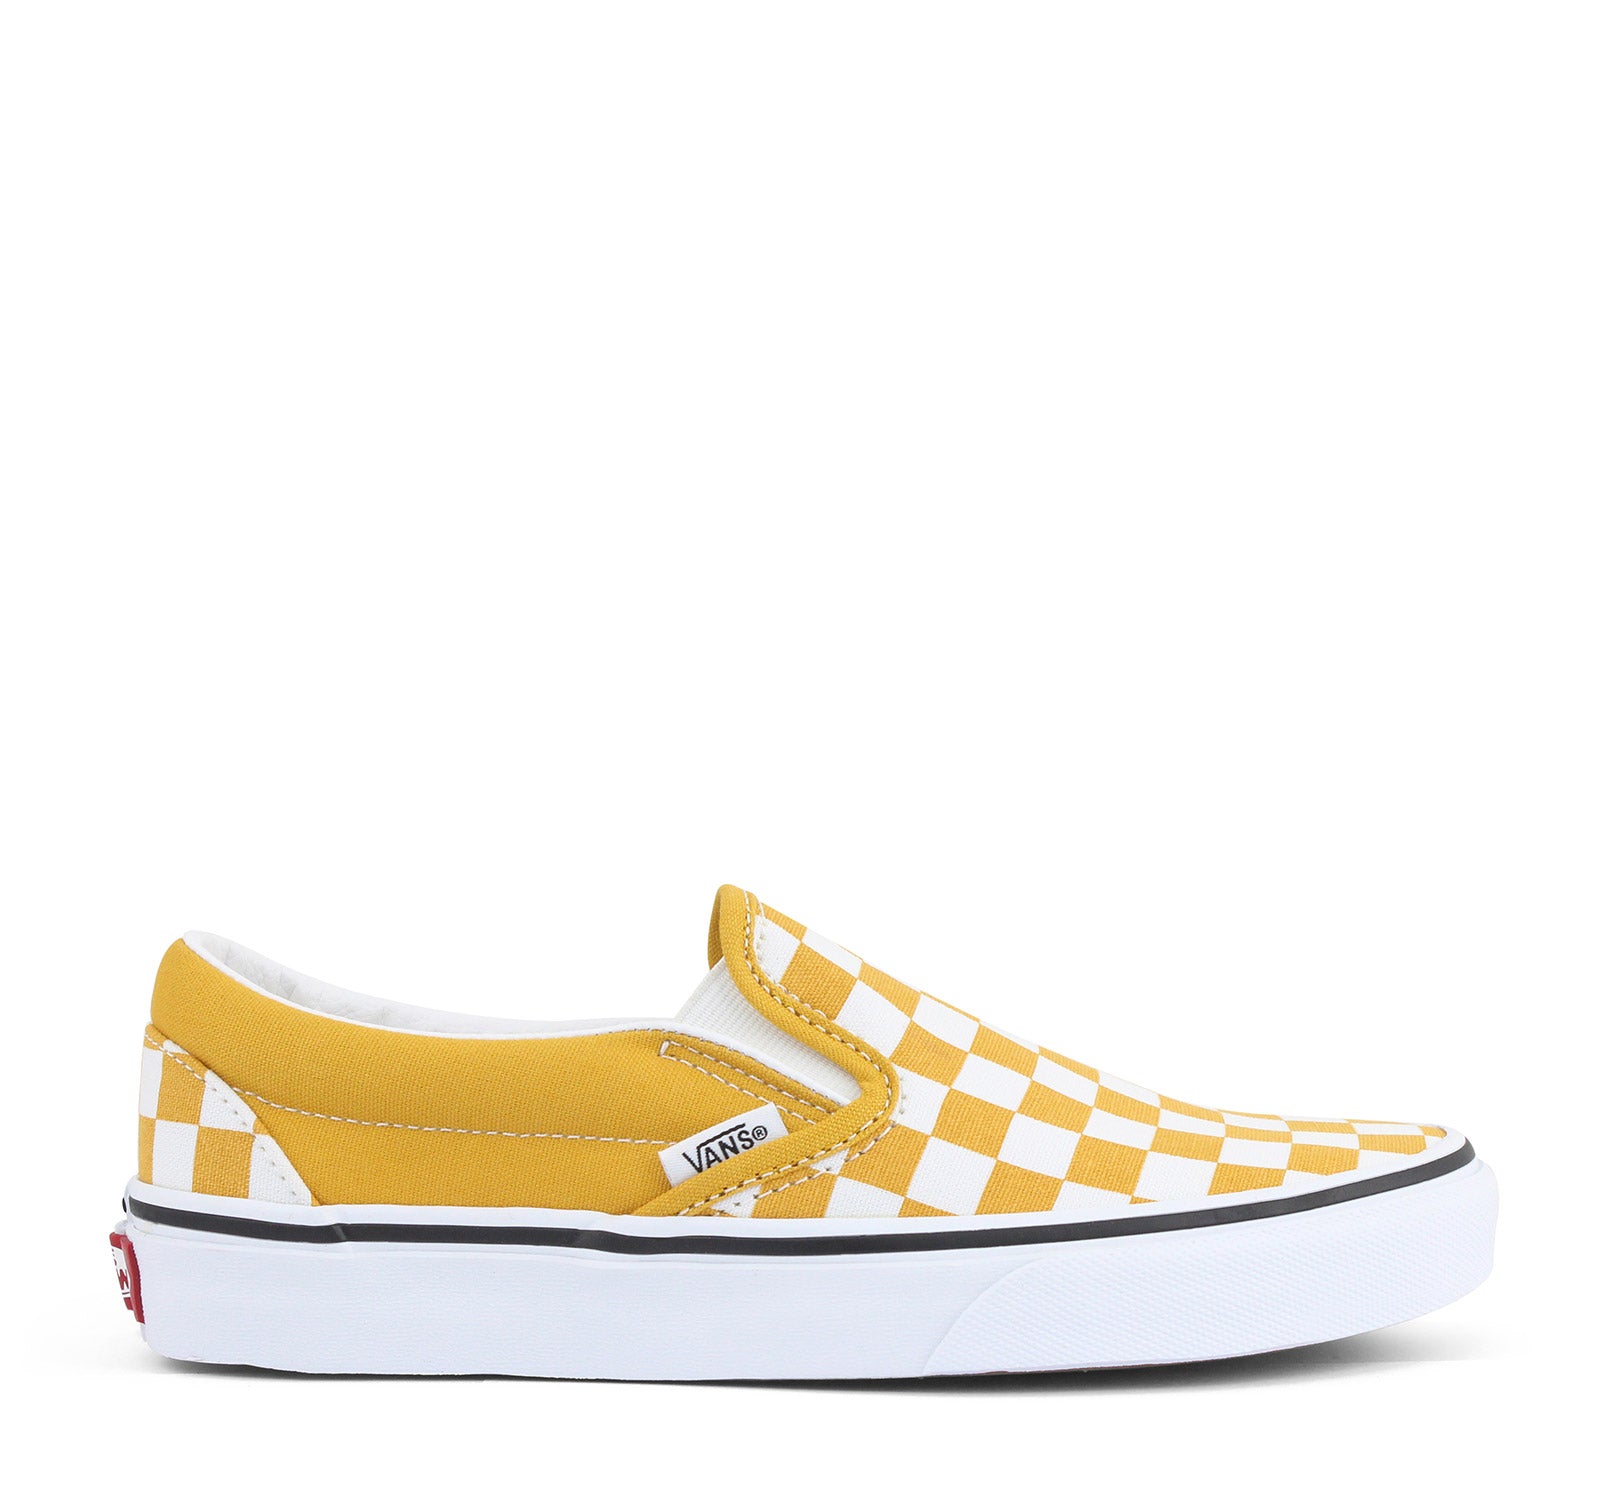 Vans Shoes Yellow Checkered Size 8.5